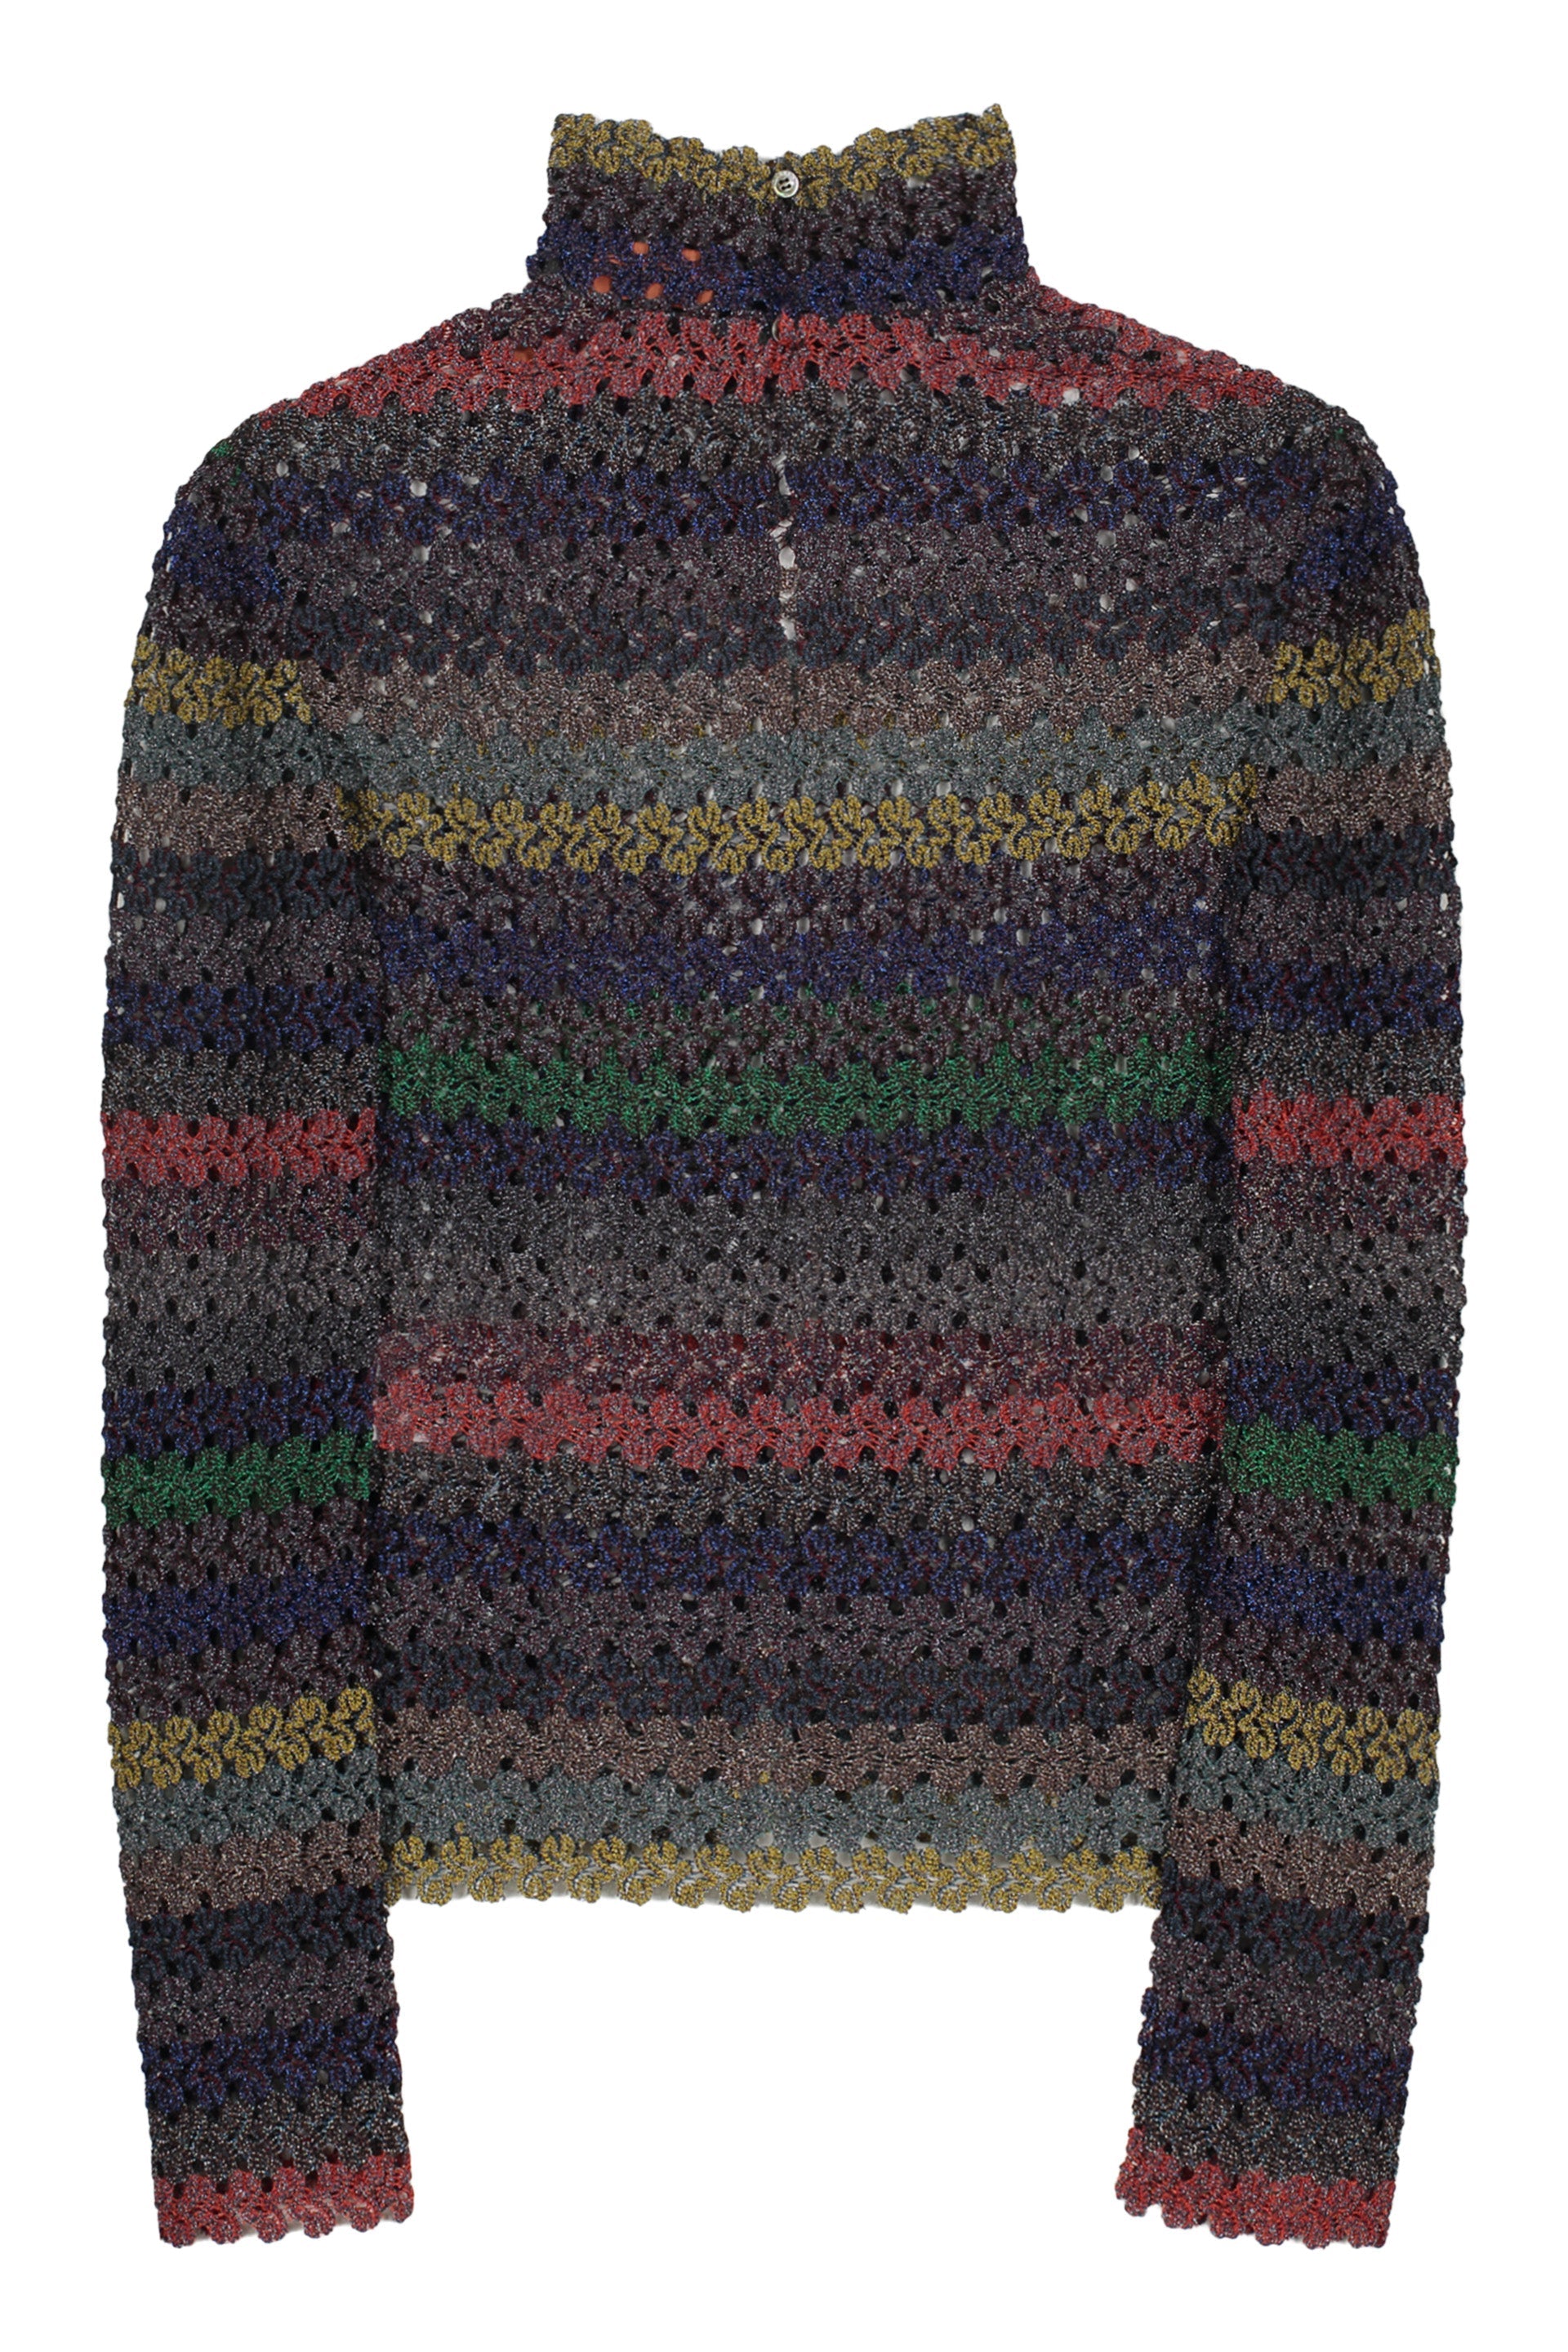 Missoni-OUTLET-SALE-Knitted-viscosa-blend-top-Shirts-ARCHIVE-COLLECTION-2_ba4d72c2-a21c-4b25-8987-6e70fe16538c.jpg